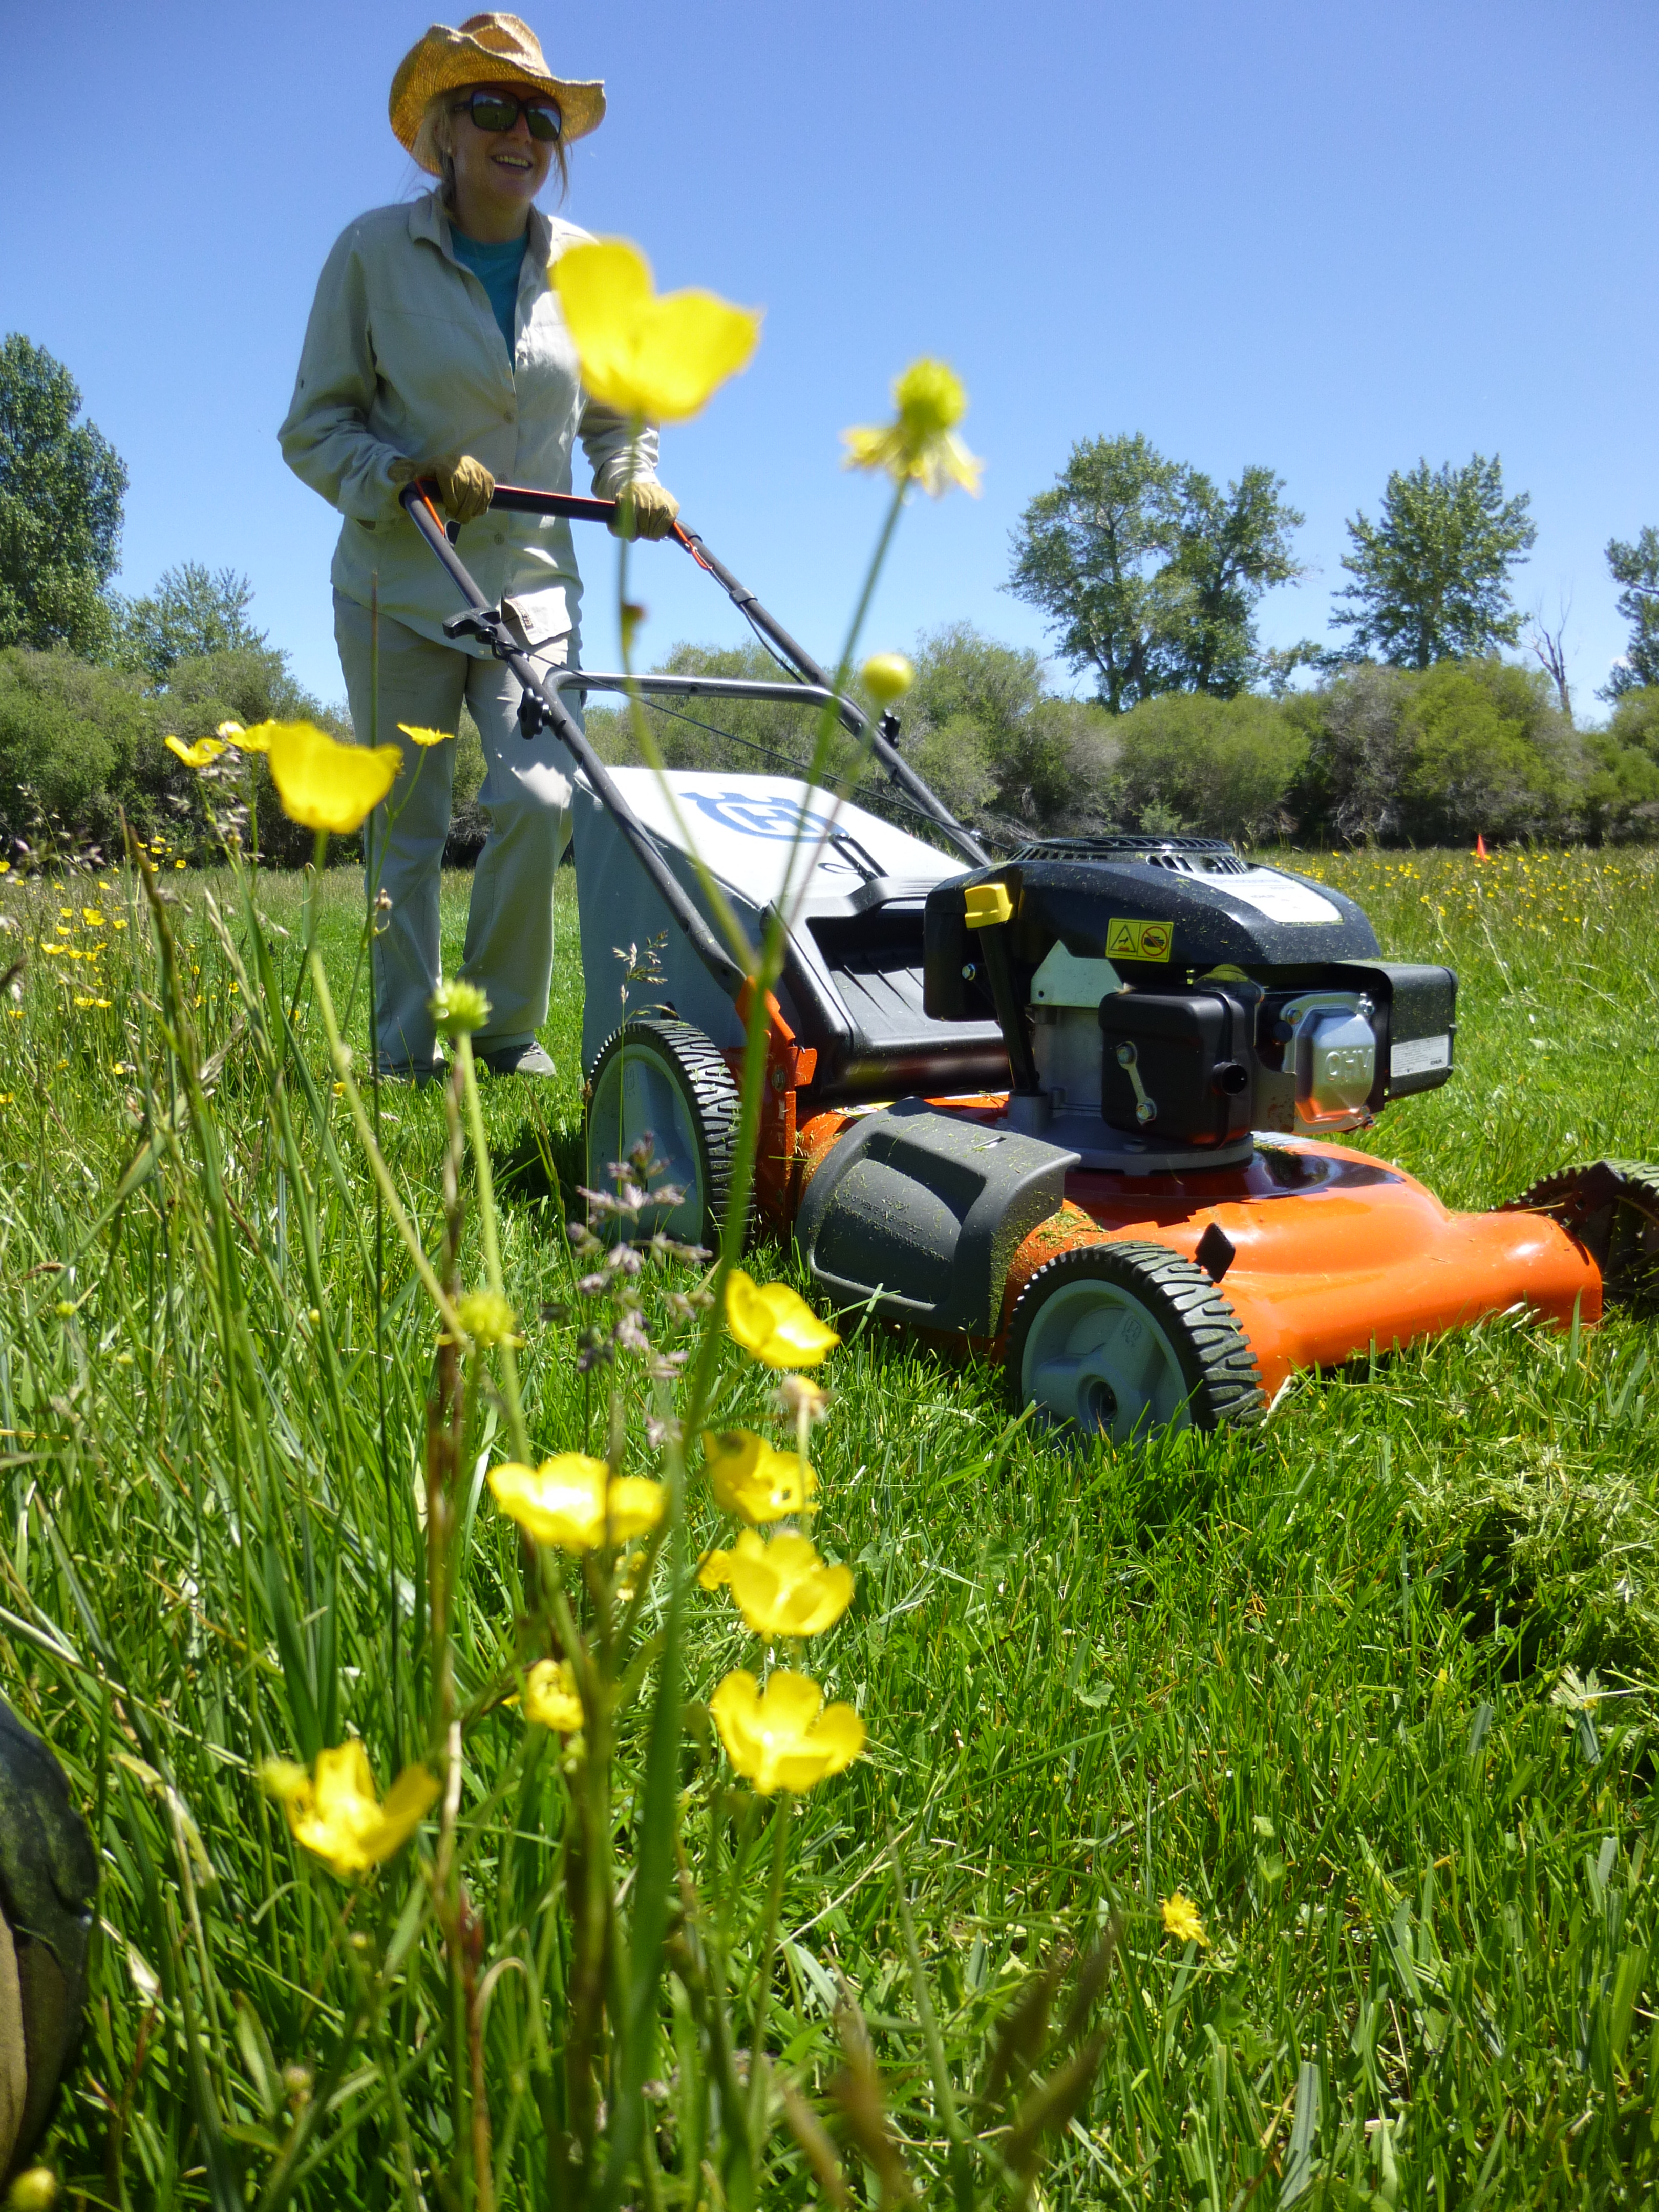 Yellow flowered plant and green grass with woman pushing a lawnmower in the background.